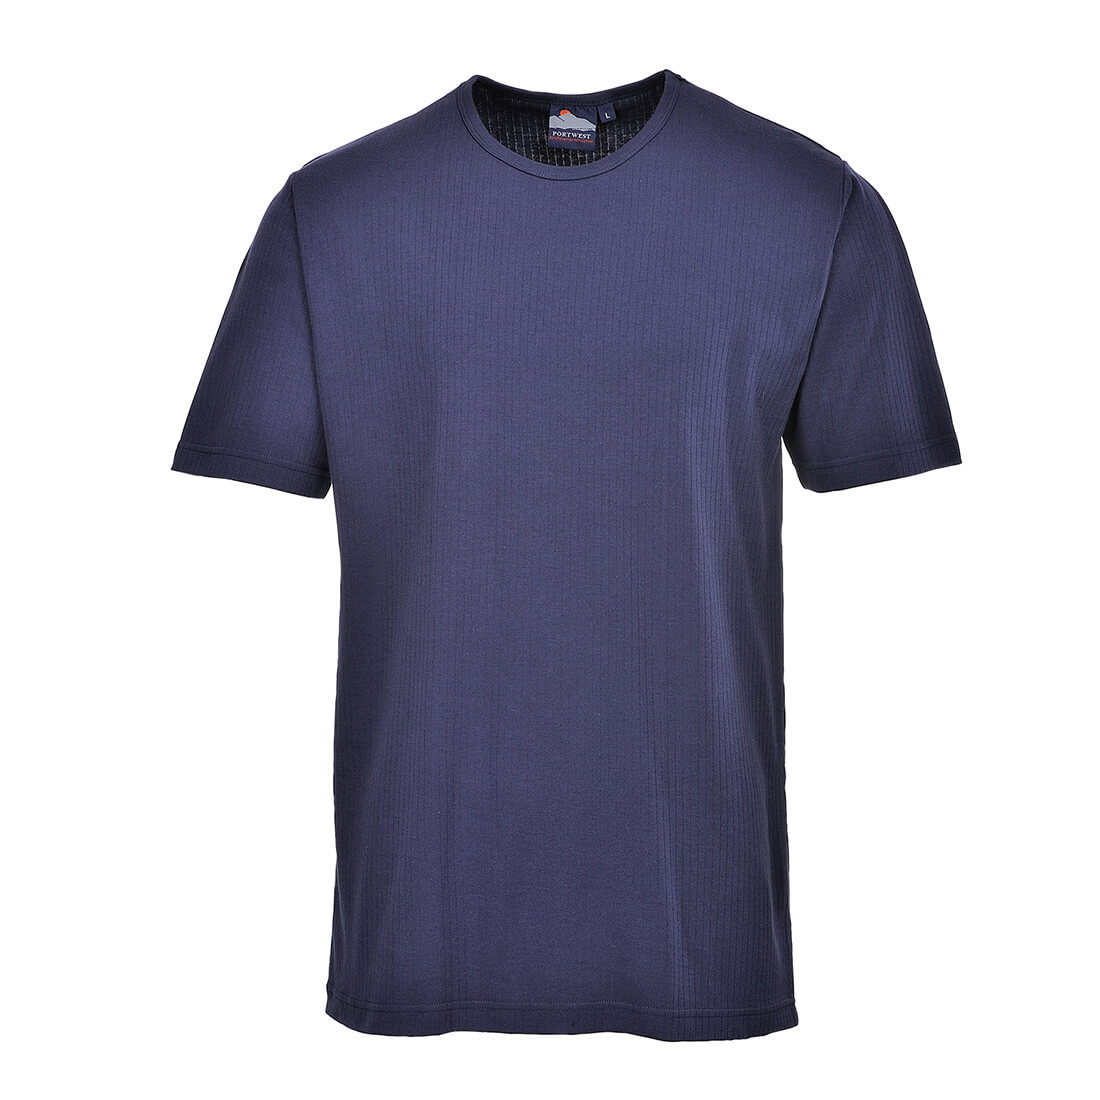 Image of Portwest Thermal Short Sleeve T Shirt Navy 3XL